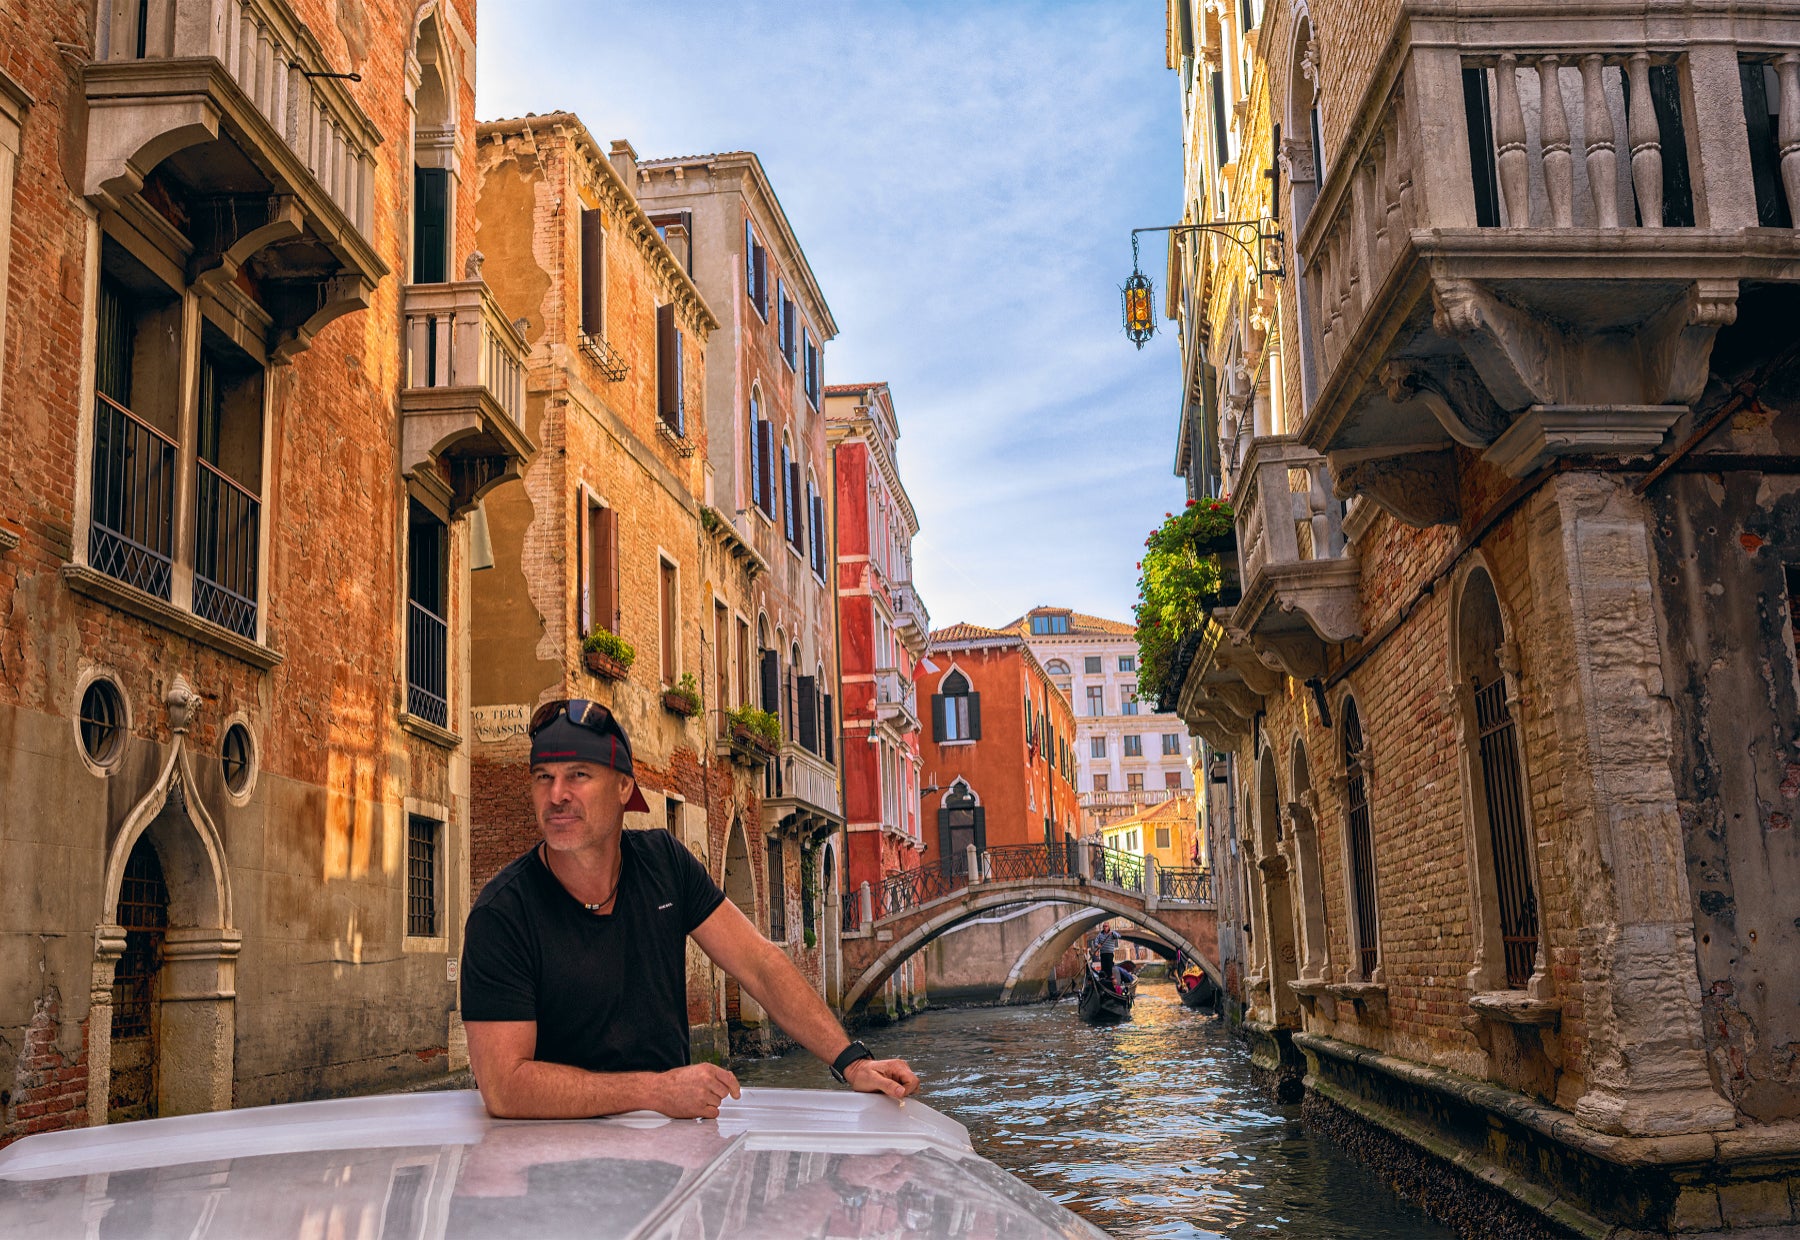 Portrait of Peter Lik in a baseball cap standing in a boat traveling through the canals of Venice, Italy.